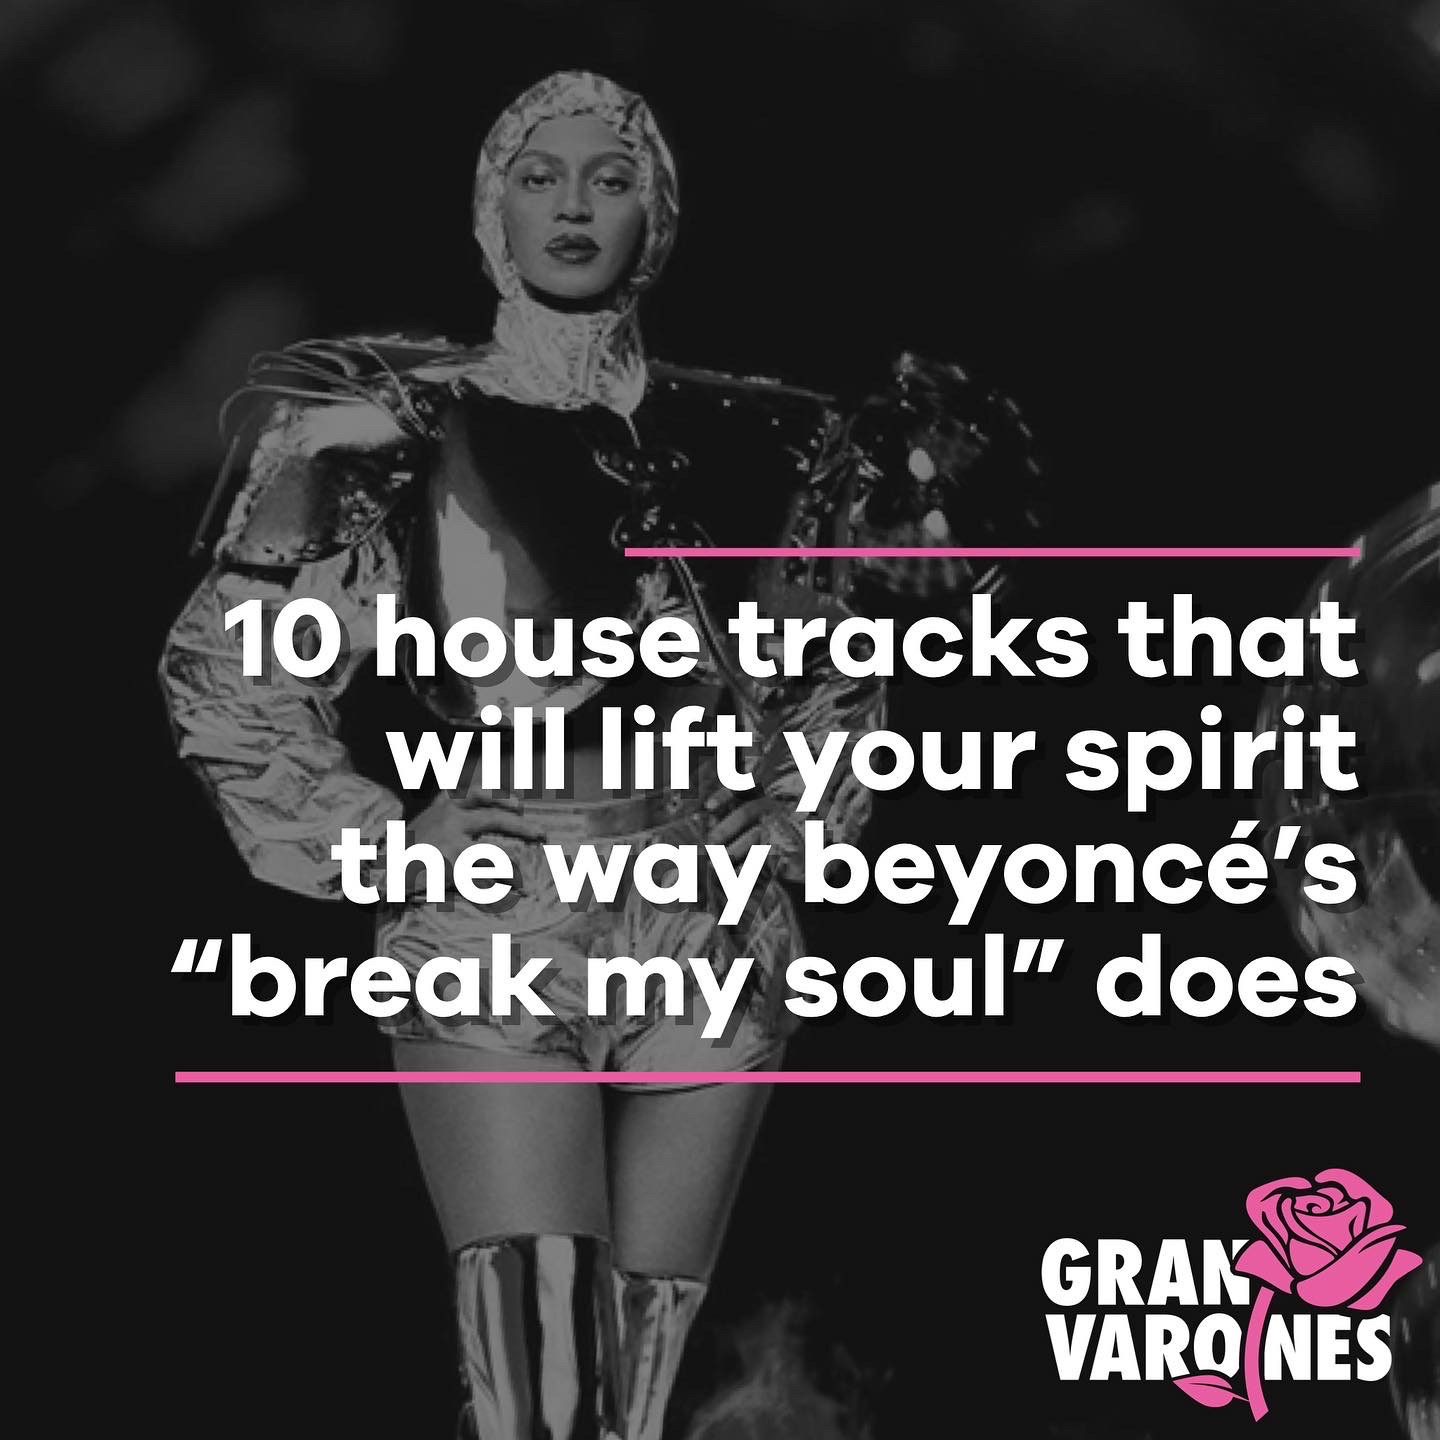 Ten House Tracks From the 90s that Will Lift Your Spirits the way Beyonce’s “Break My Soul” Does